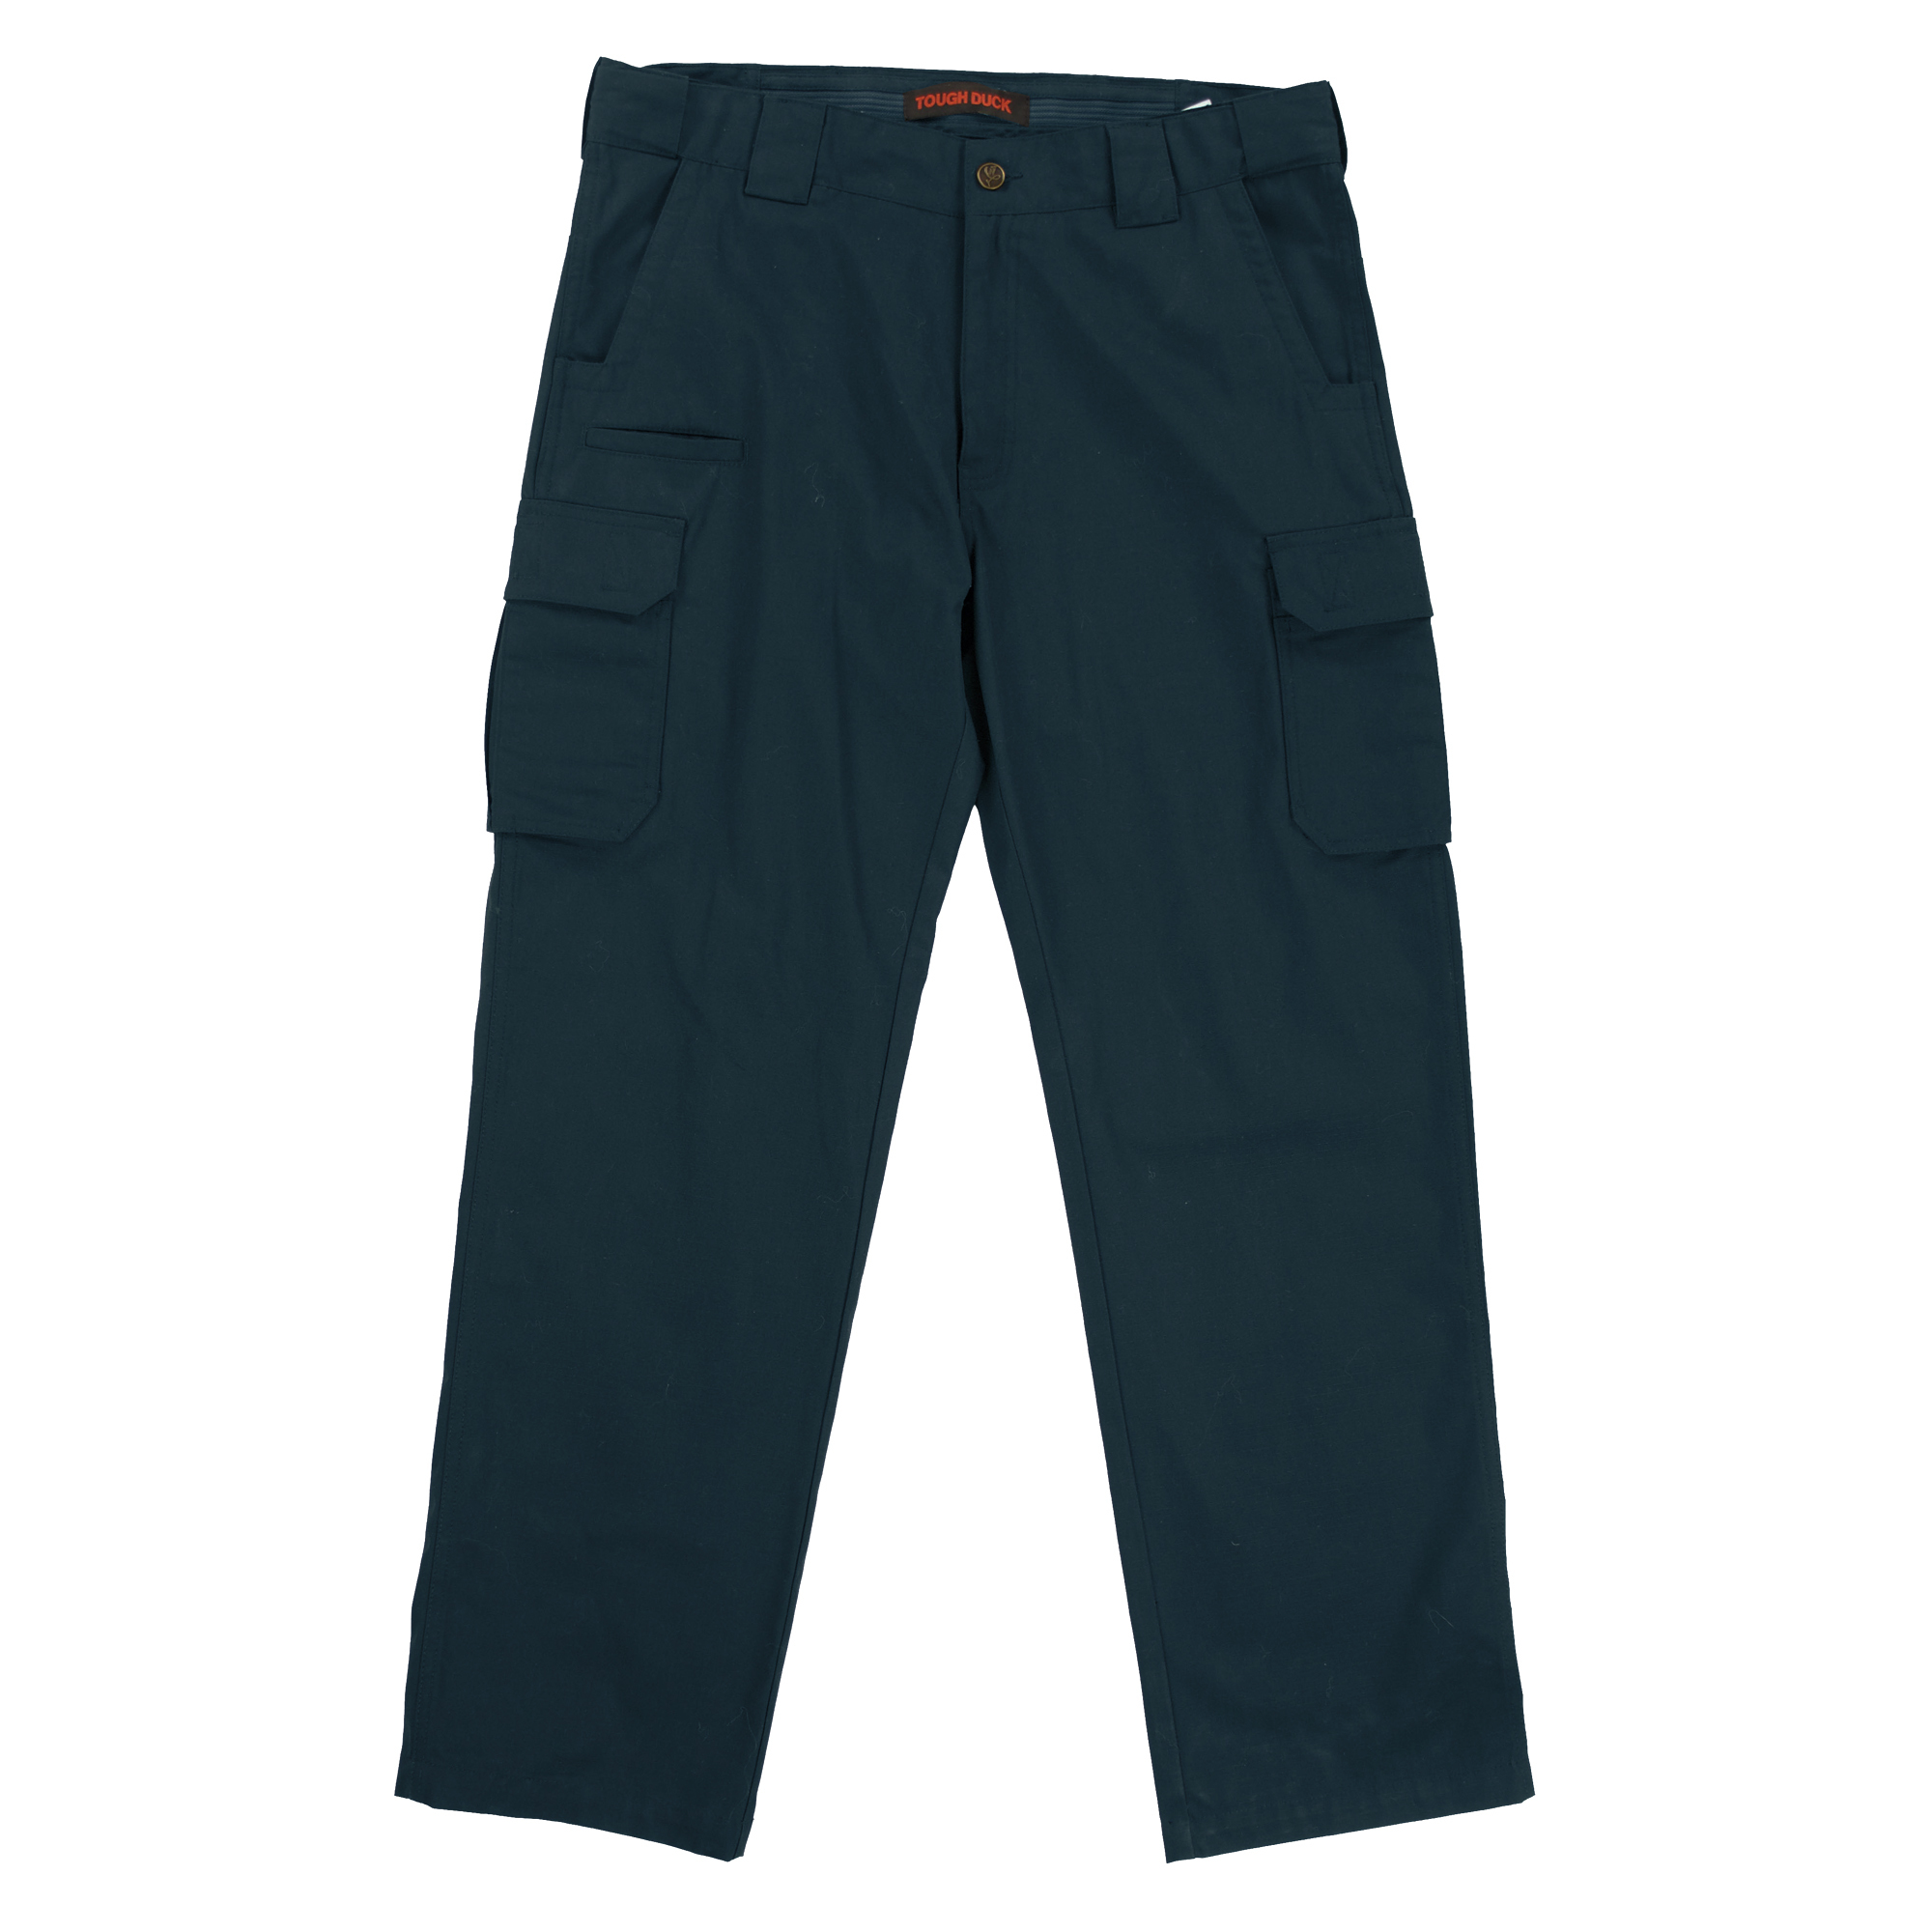 Tough Duck, Ripstop Cargo Pant, Waist 42 in, Inseam 30 in, Color Navy, Model WP110